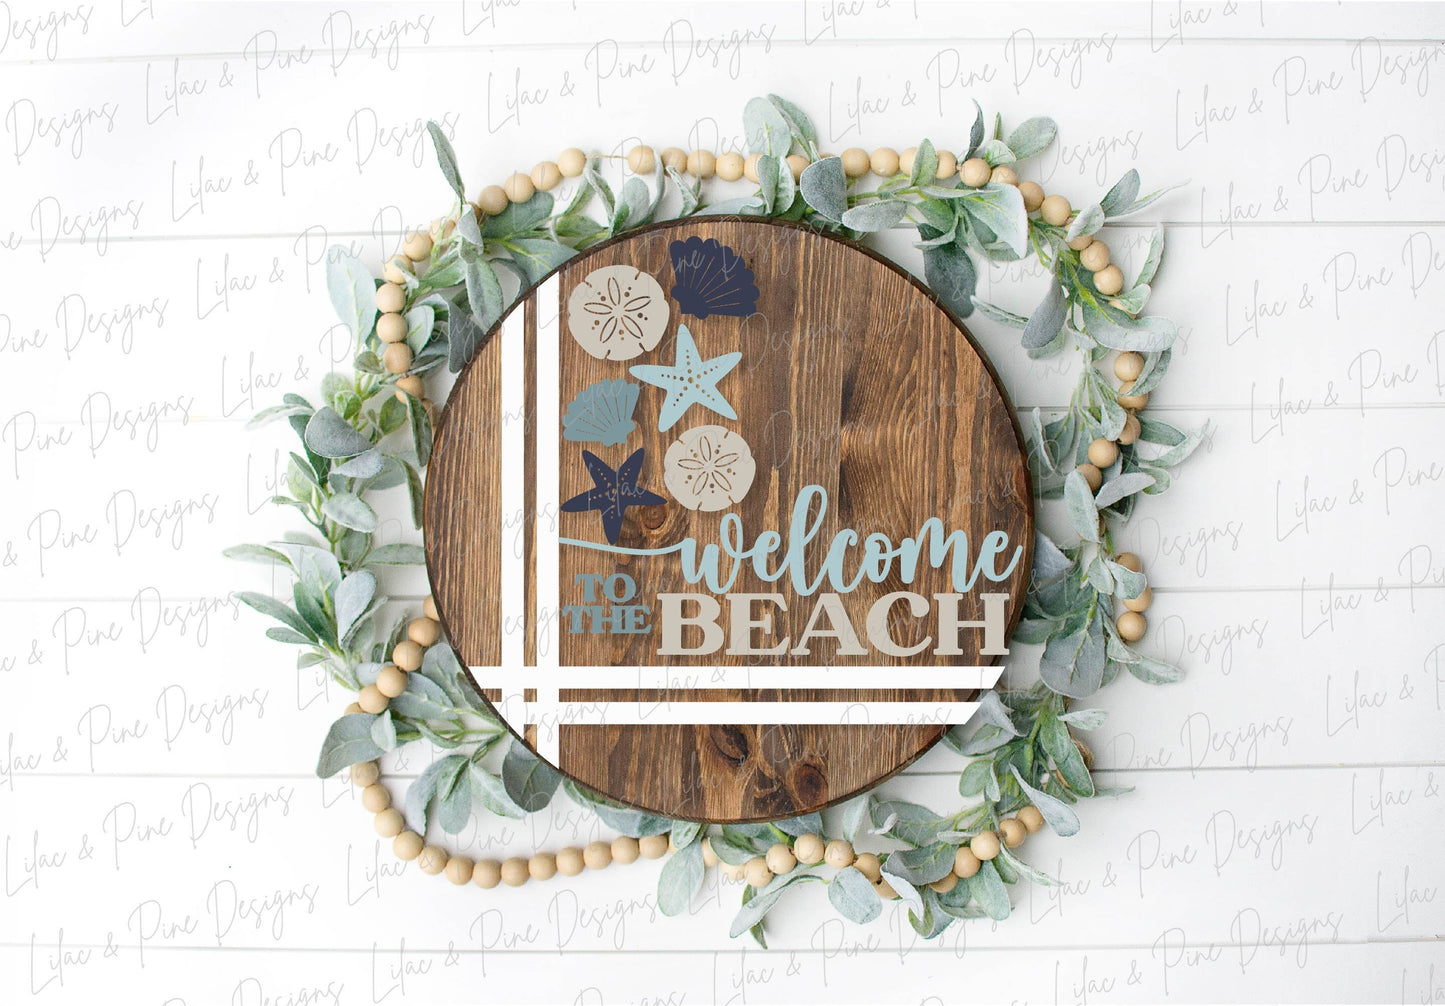 Welcome to the Beach door hanger SVG, welcome sign SVG, seashell svg, coastal porch sign svg, Beach decor, Glowforge Svg, laser cut file